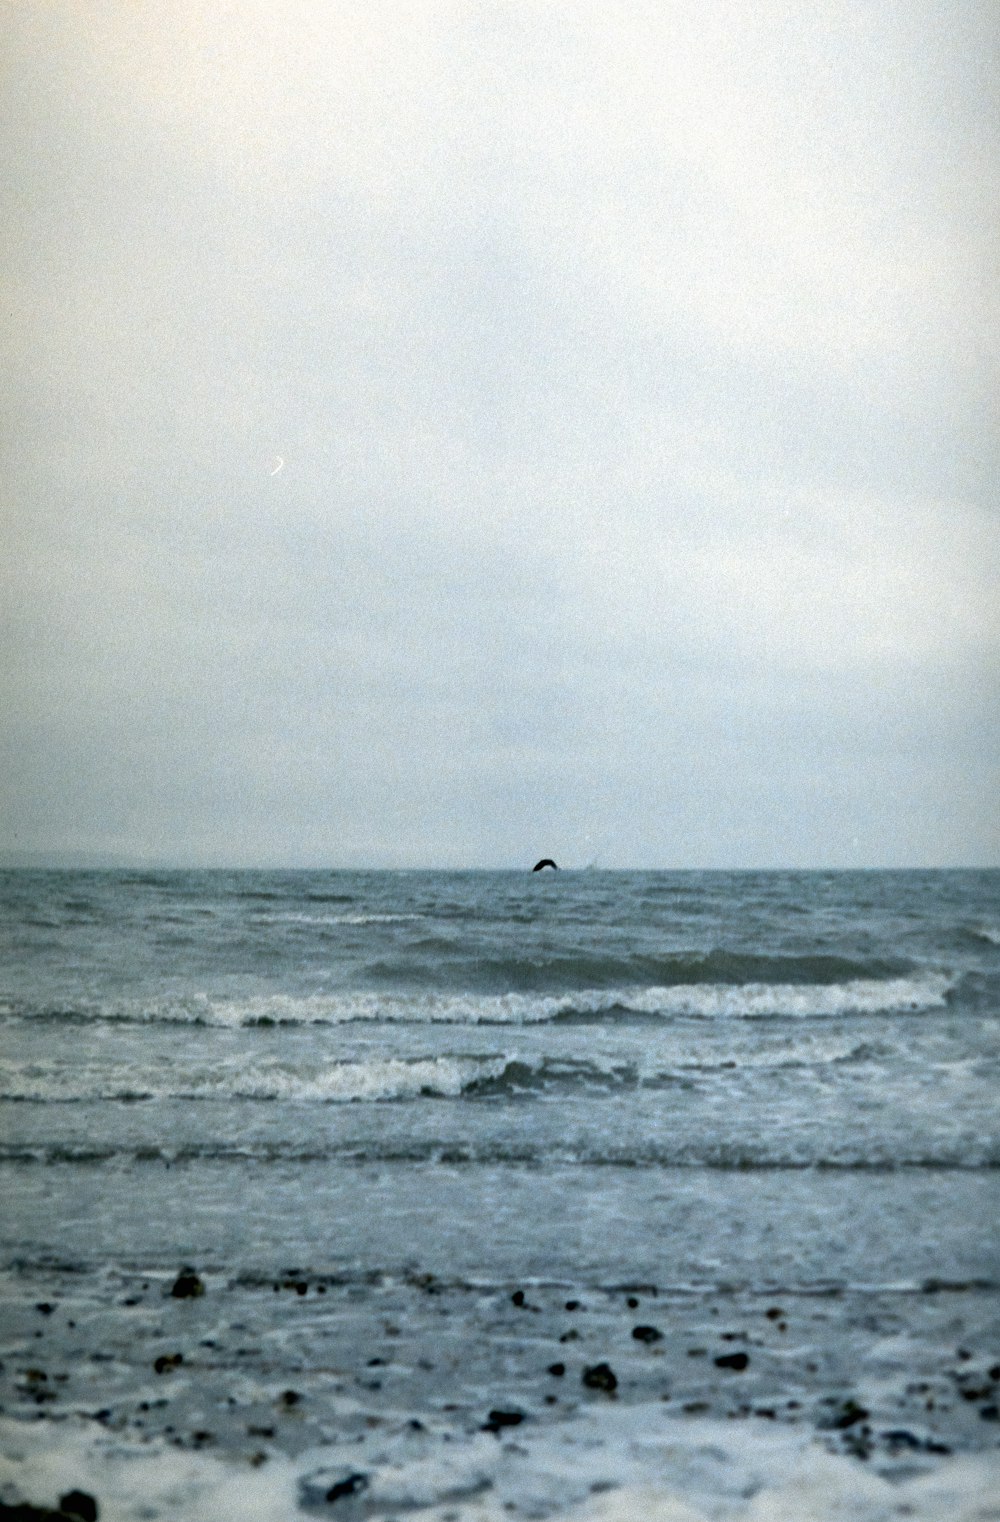 a person riding a surfboard on top of a wave in the ocean